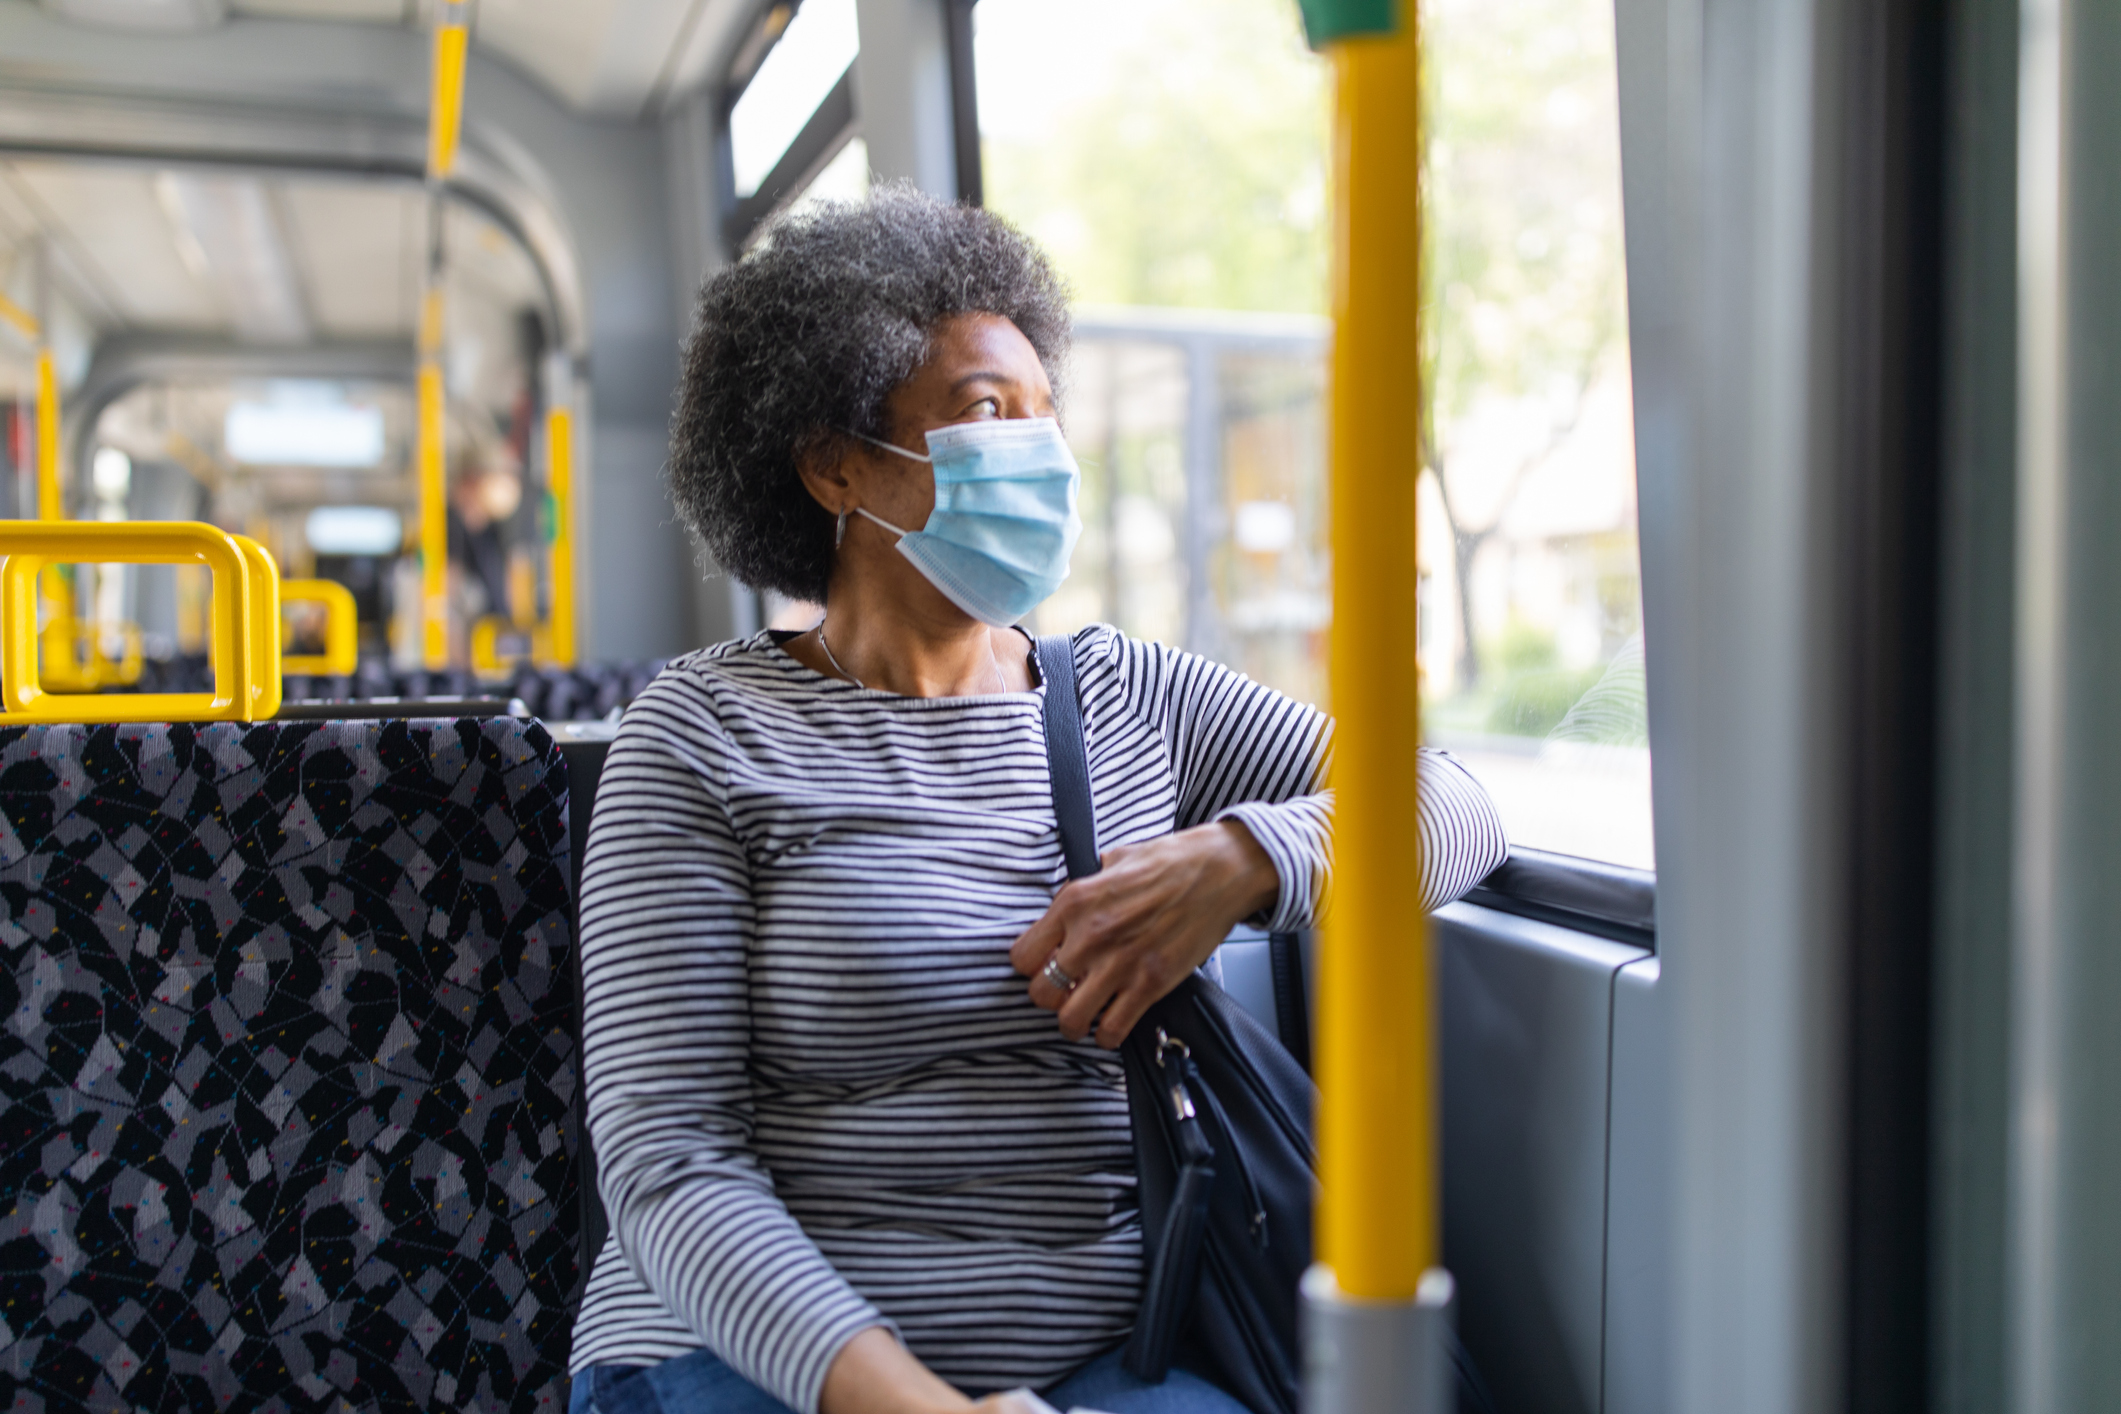 A woman rides a bus while wearing a face mask